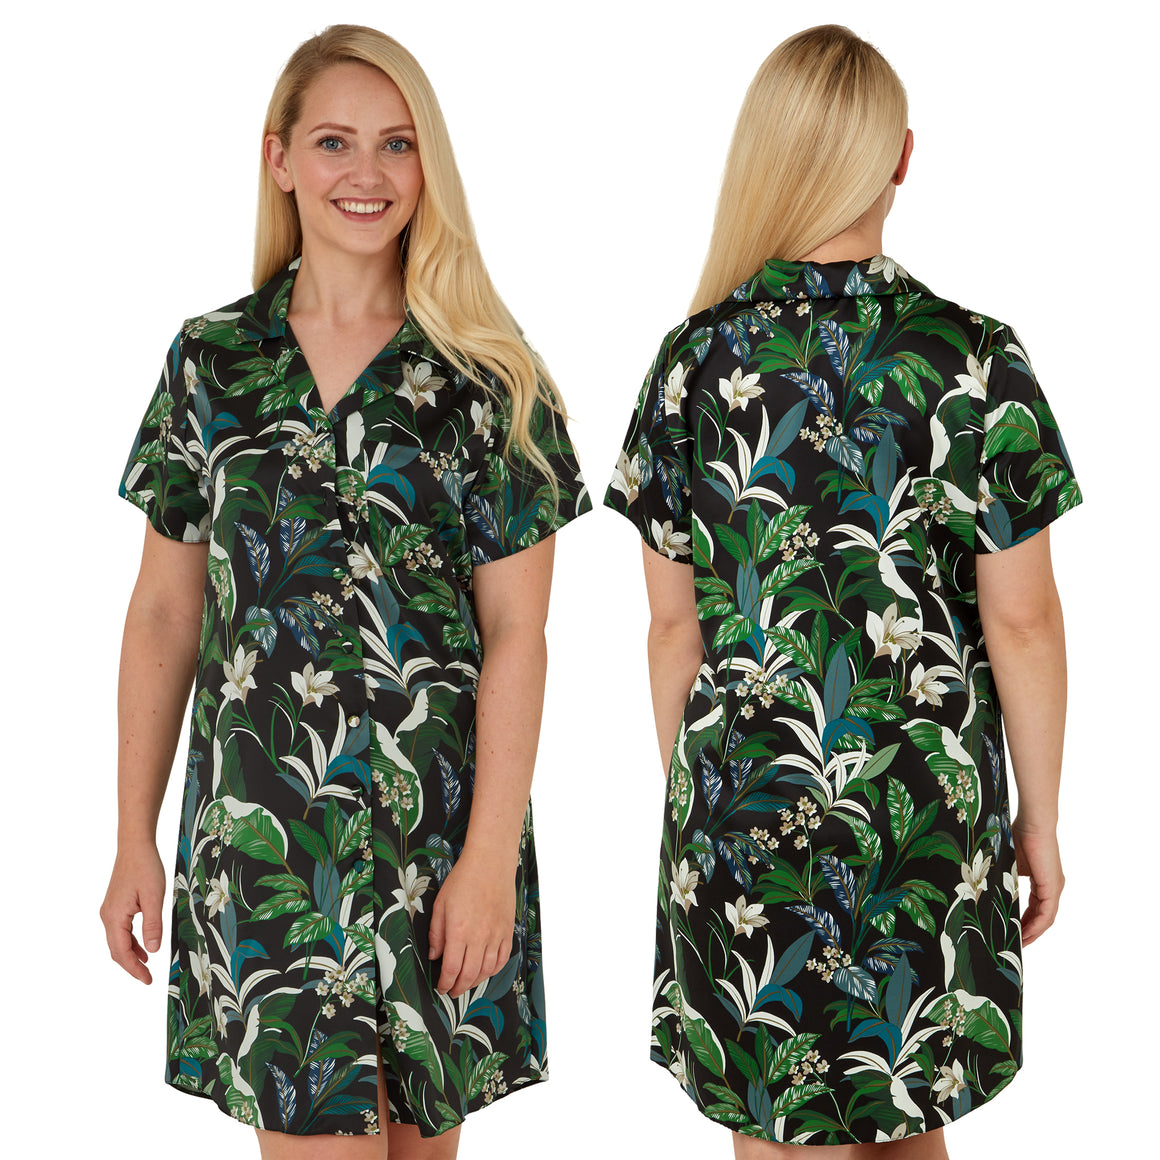 Satin Nightshirts in UK Plus Sizes 10 to 32! – Just For You Boutique®